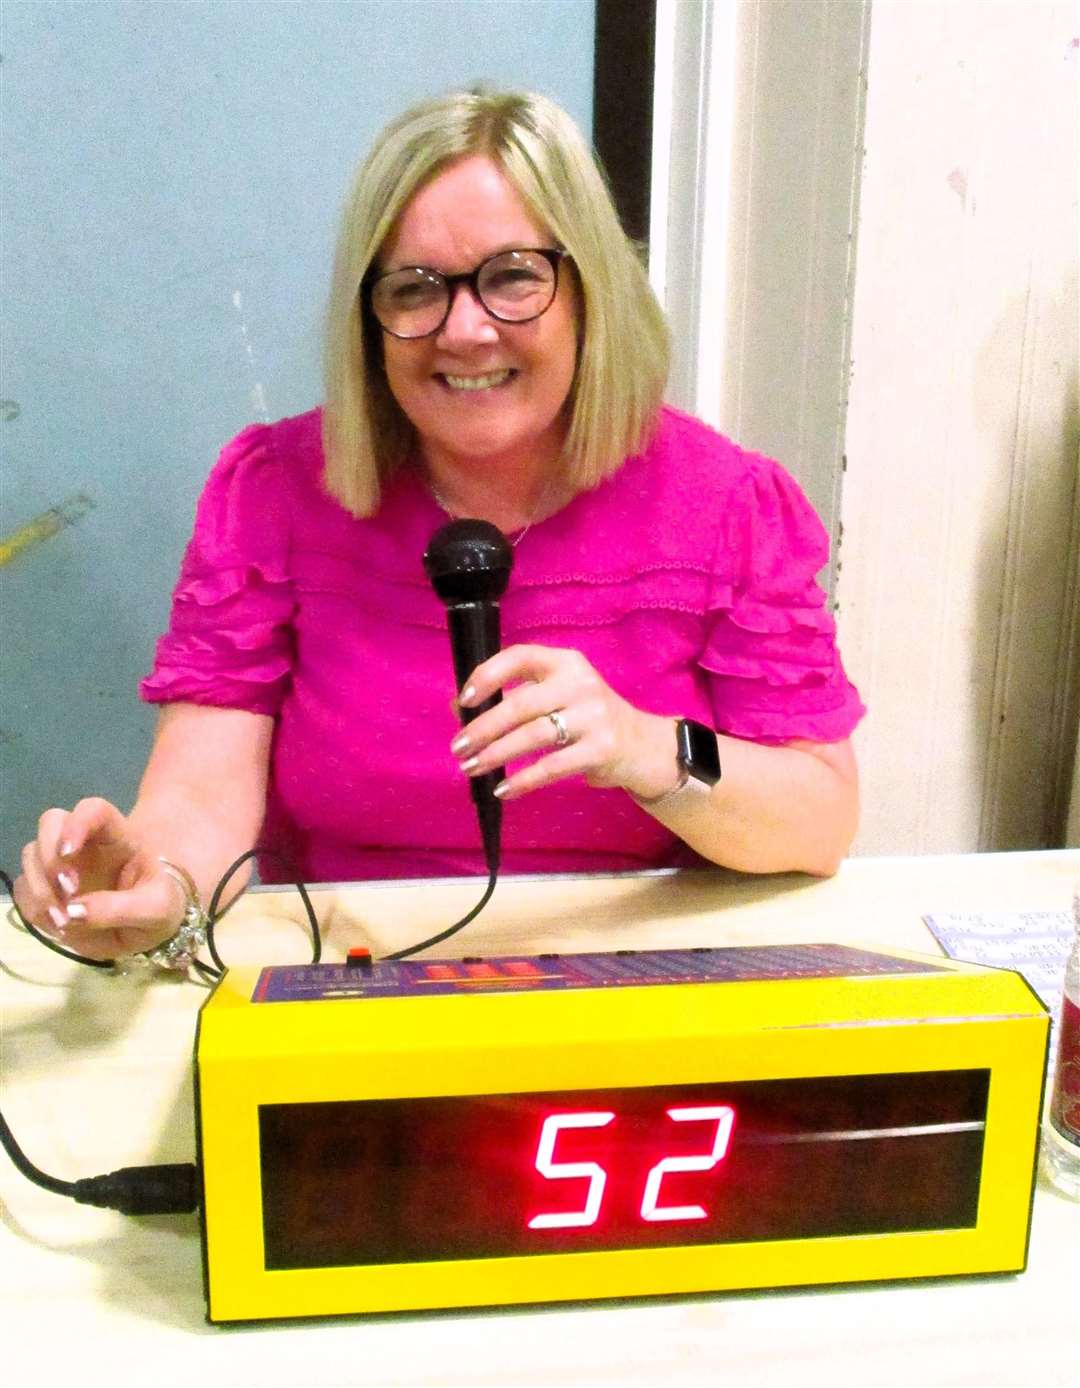 Bingo caller Annette Mackay who is an early years practitioner.